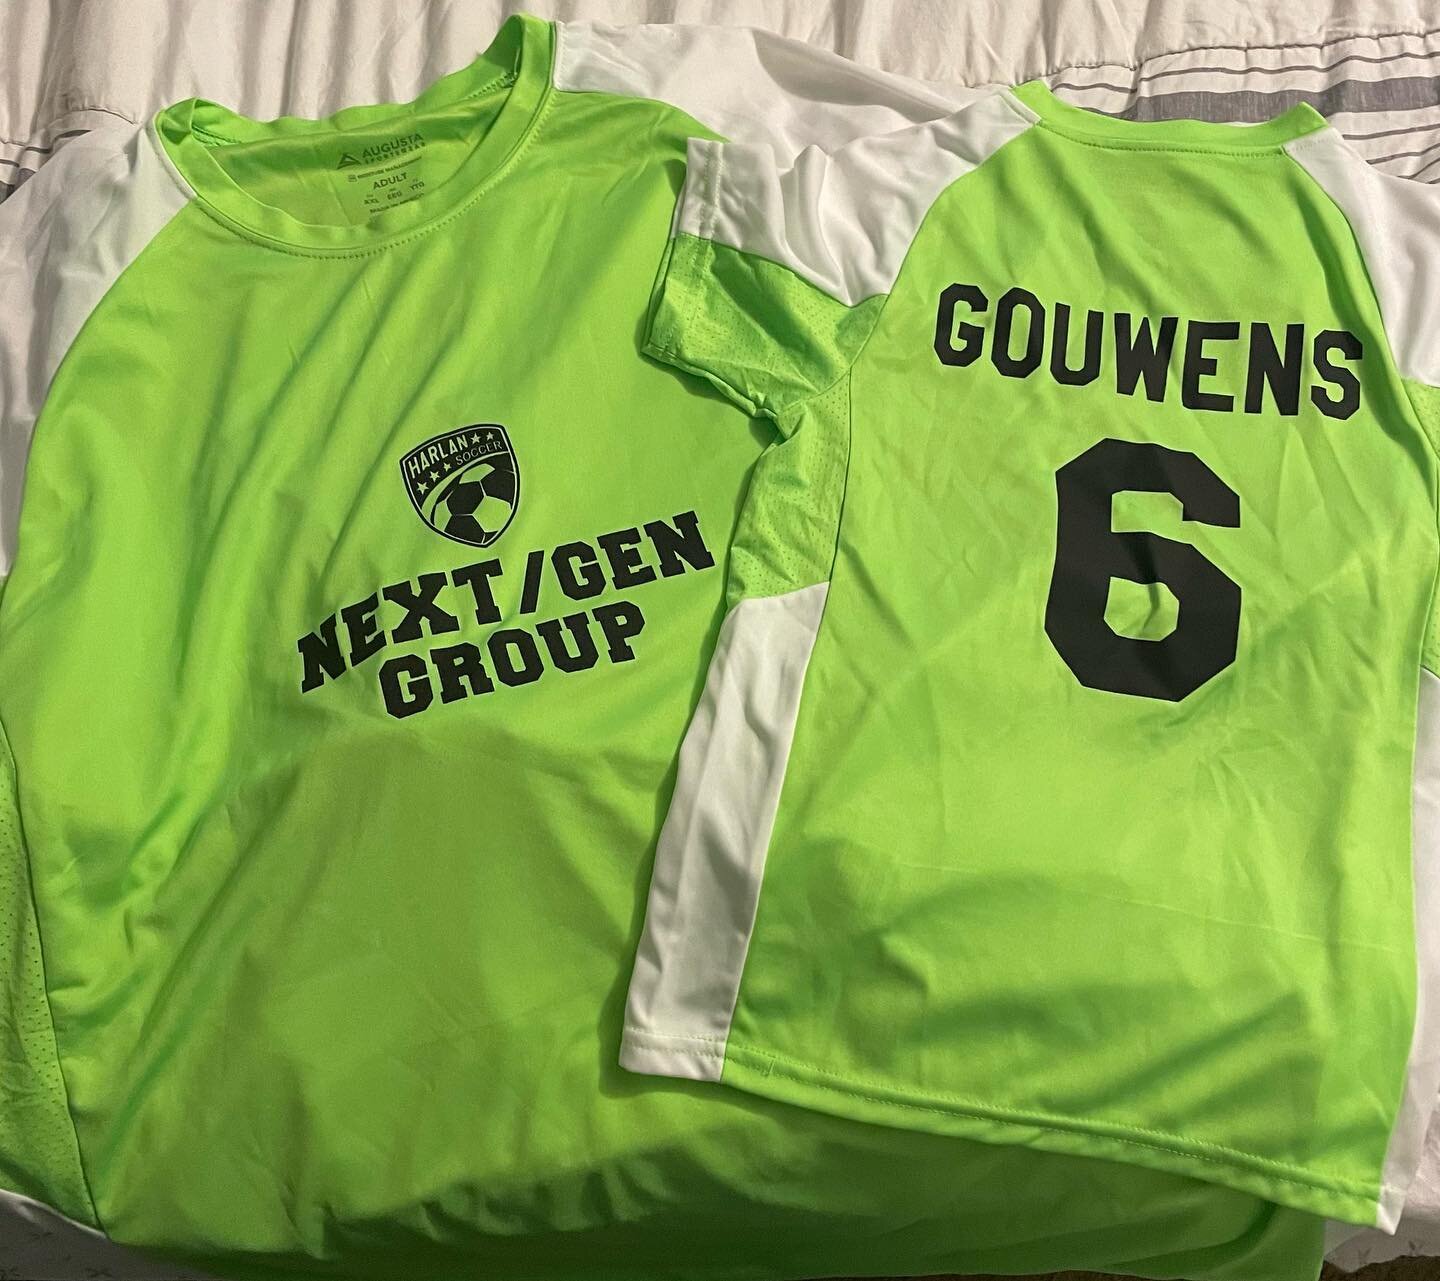 We LOVE giving back to our community! First game is this Saturday and we&rsquo;re excited to cheer them on! ⚽️🥅☘️
#soccer #harlan #youthsports #community #nextgengroup